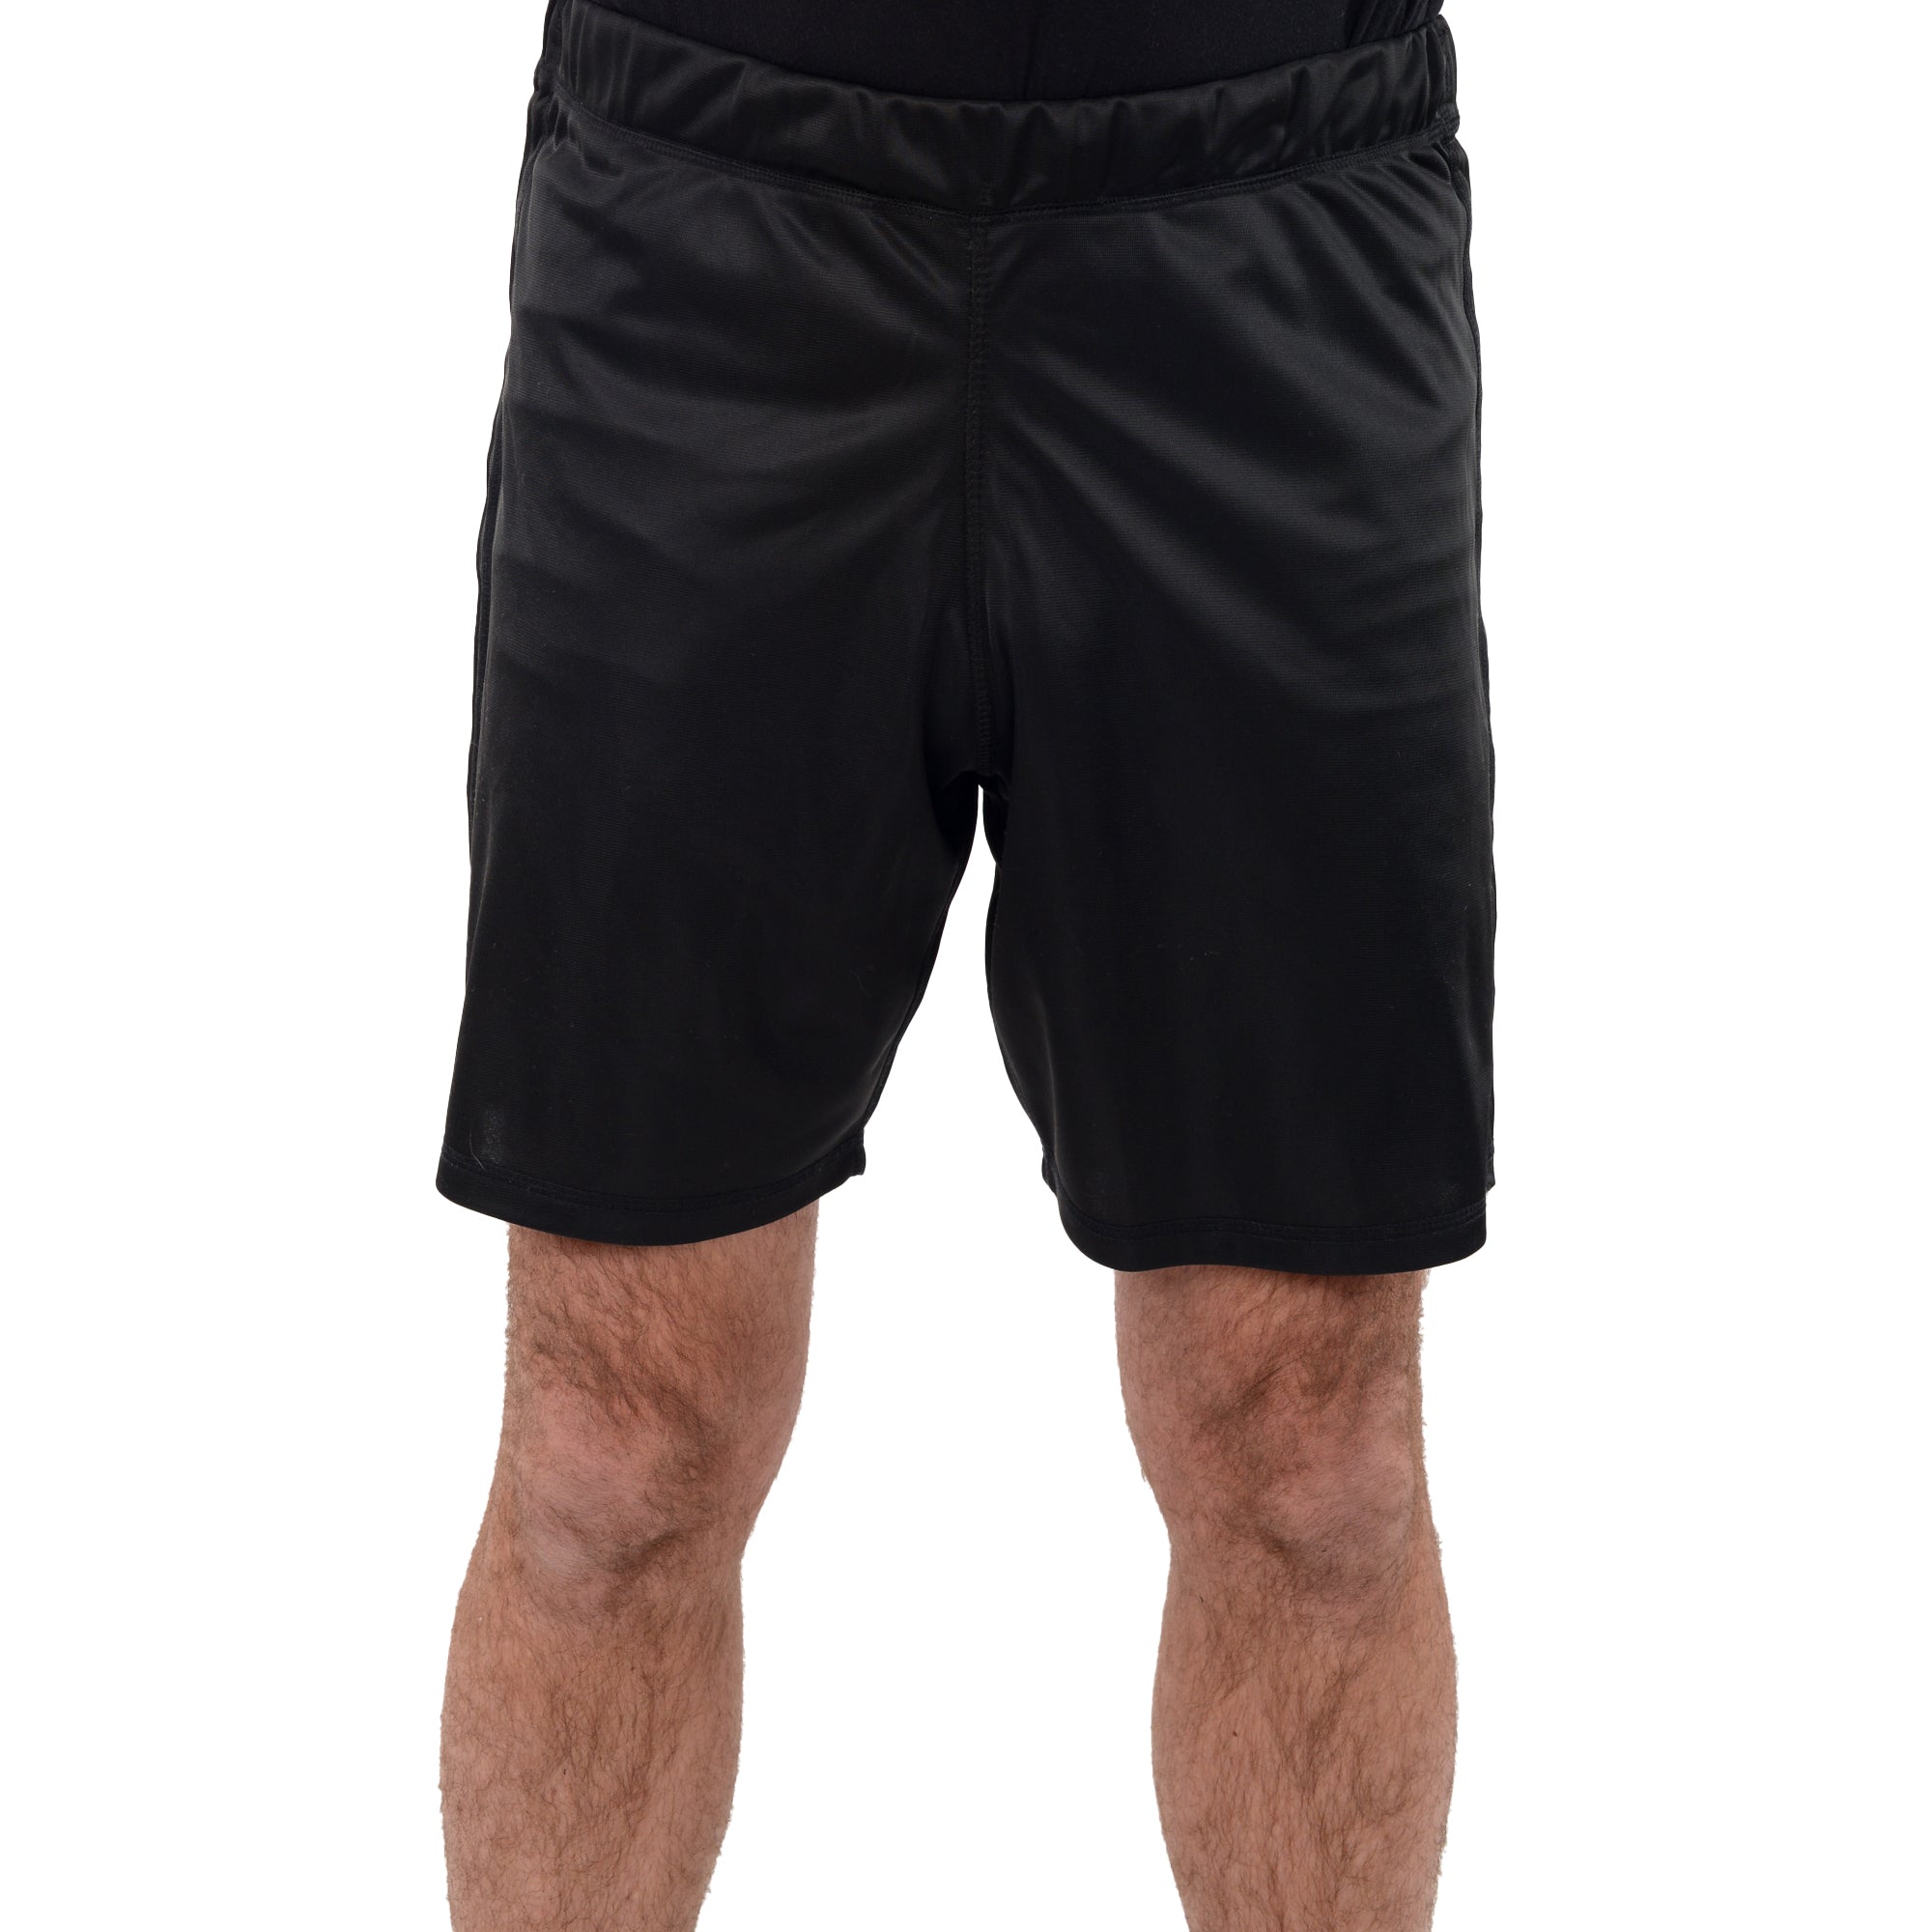 Post Surgery Tearaway Shorts - Men's & Women's - Unisex Recovery